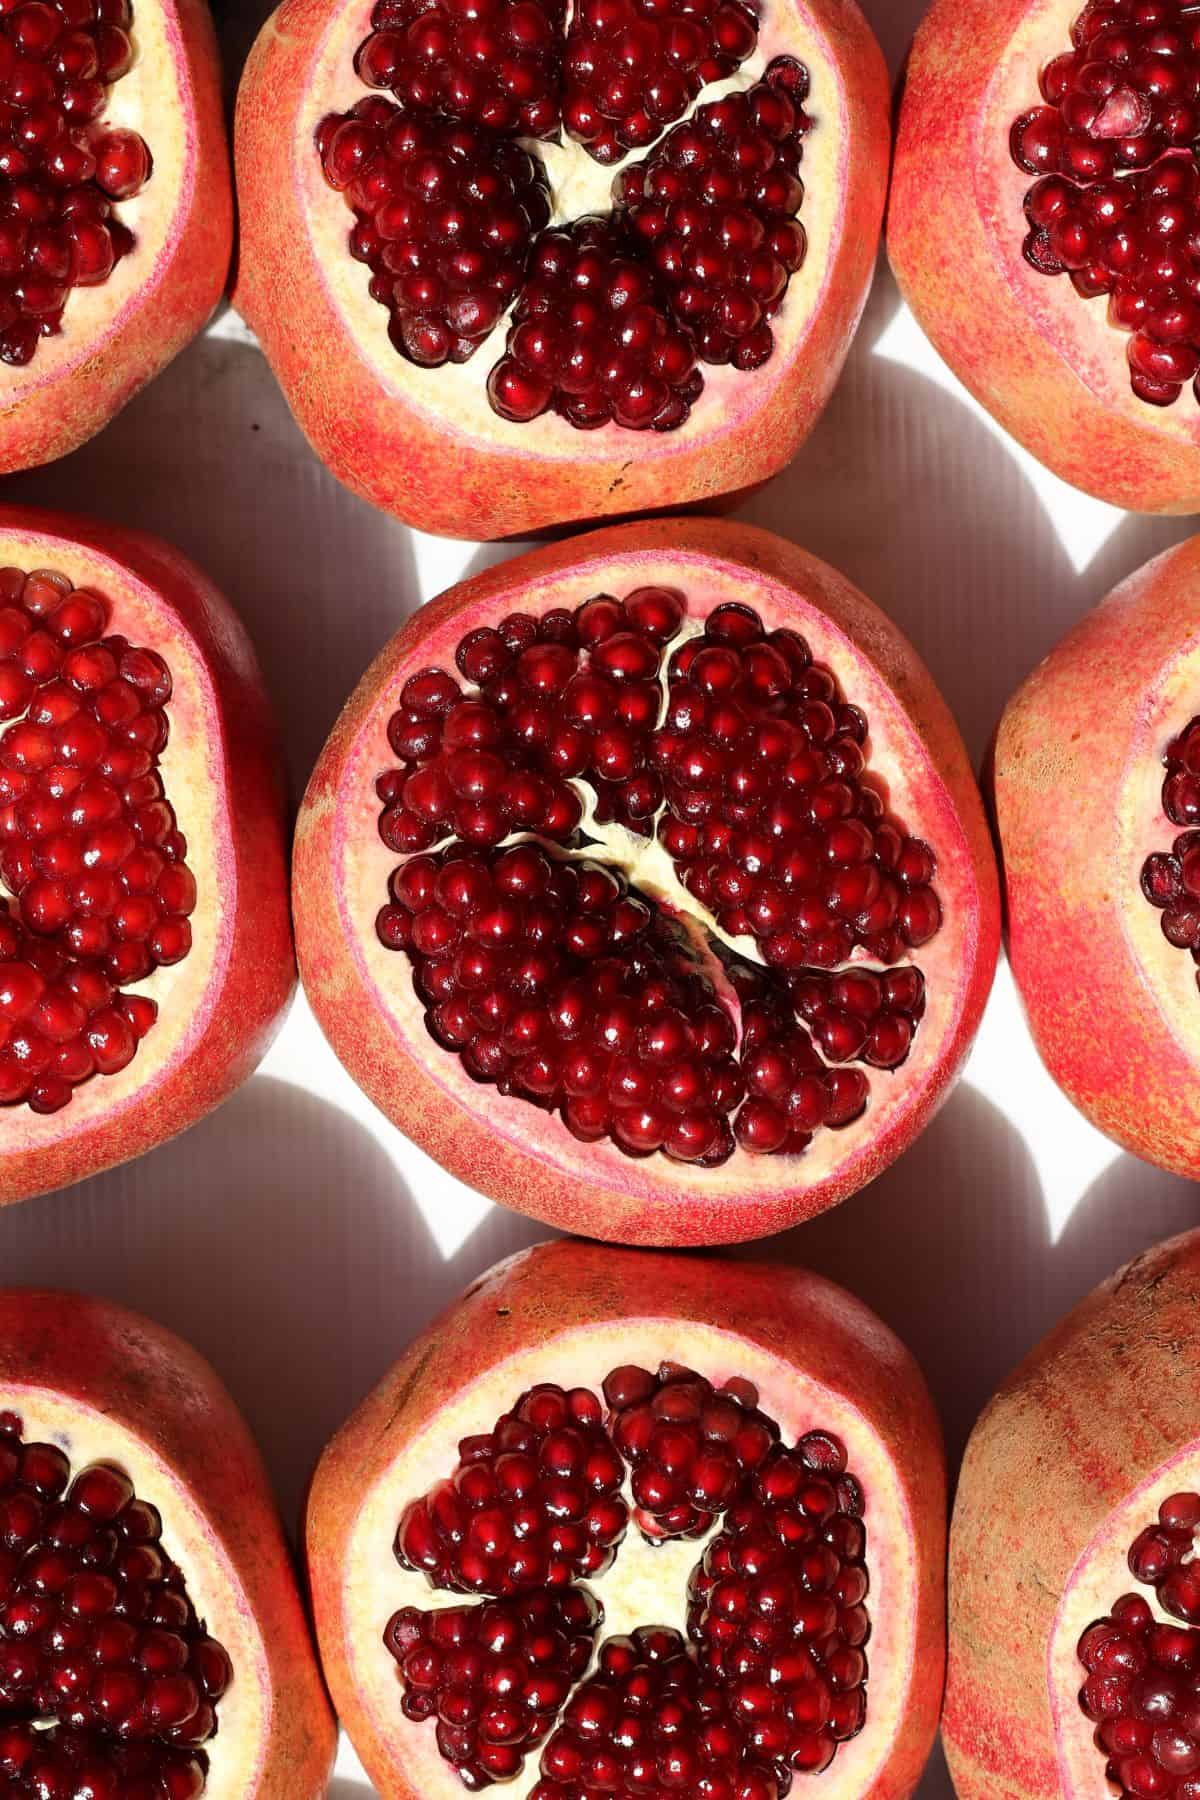 Pomegranates cut open to reveal the seeds inside. 